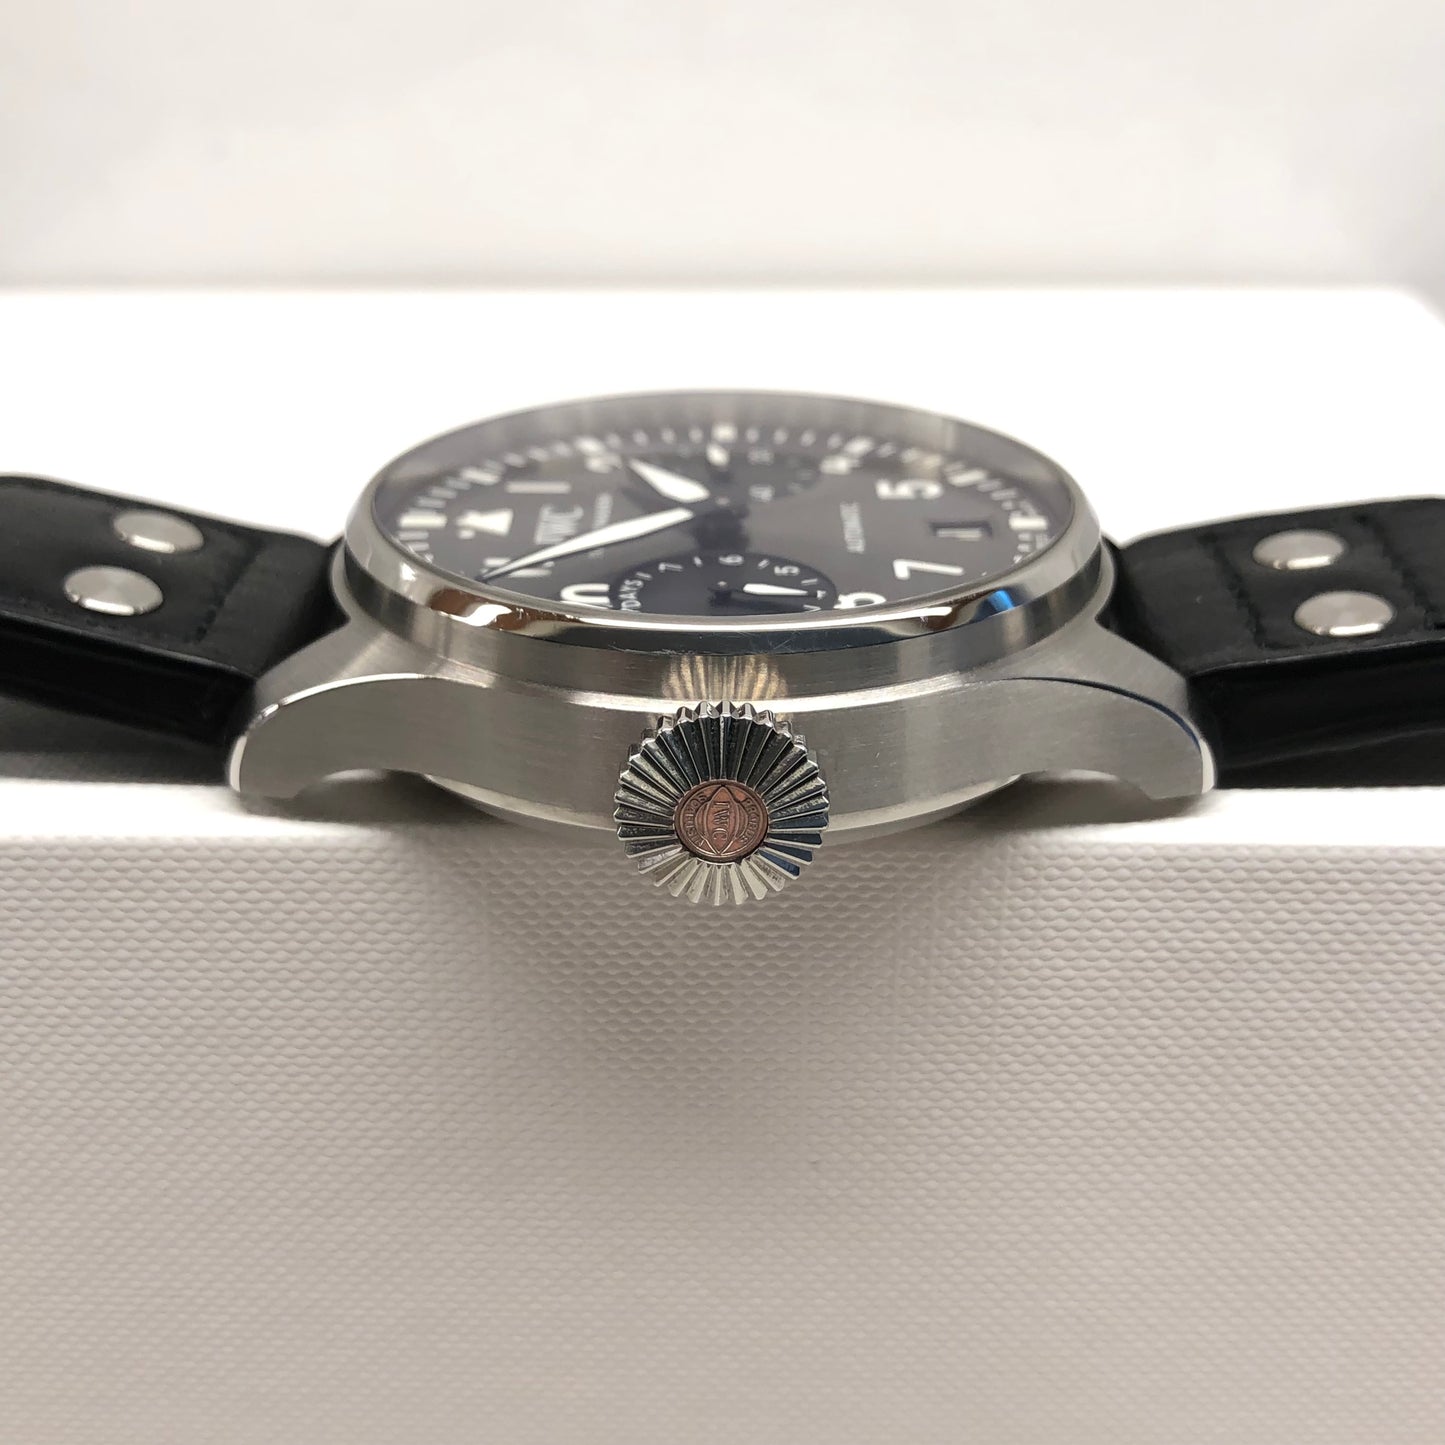 2019 IWC Big Pilot IW501012 “Right-Hander” Limited Edition Steel Chronograph Wristwatch with Box and Papers - Hashtag Watch Company